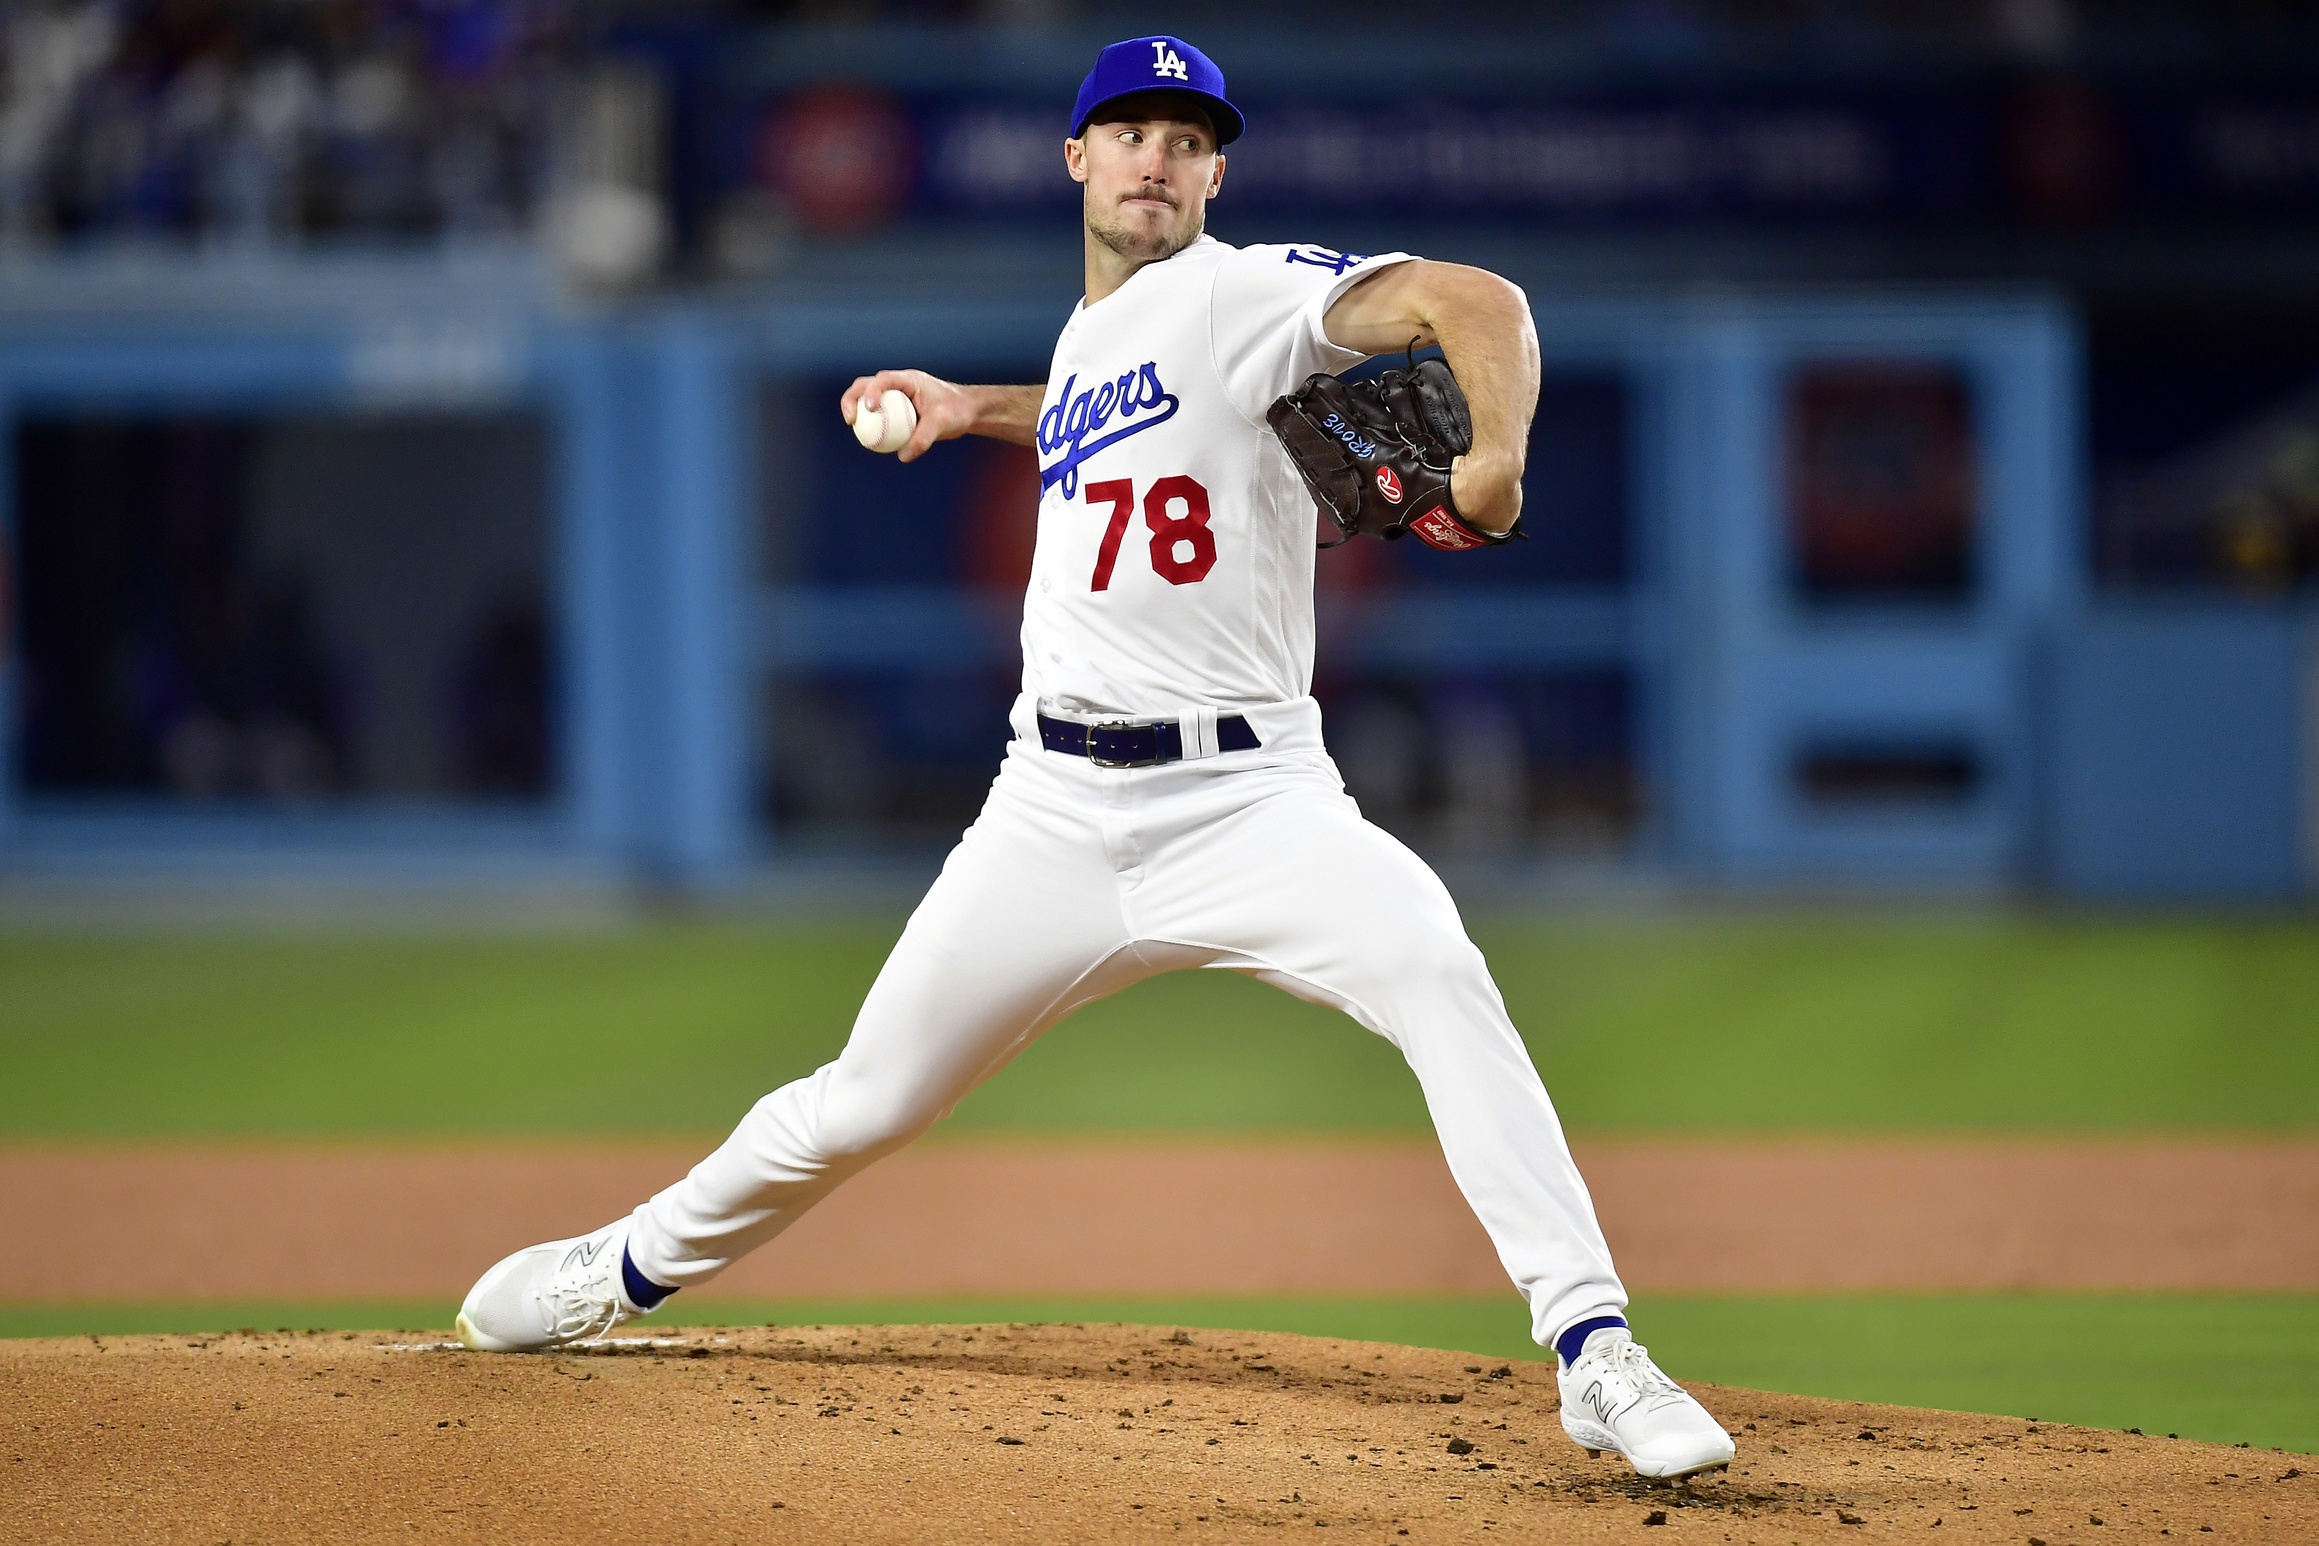 Dodgers Injury News: Michael Grove Exceptional in 2nd MiLB Rehab Start